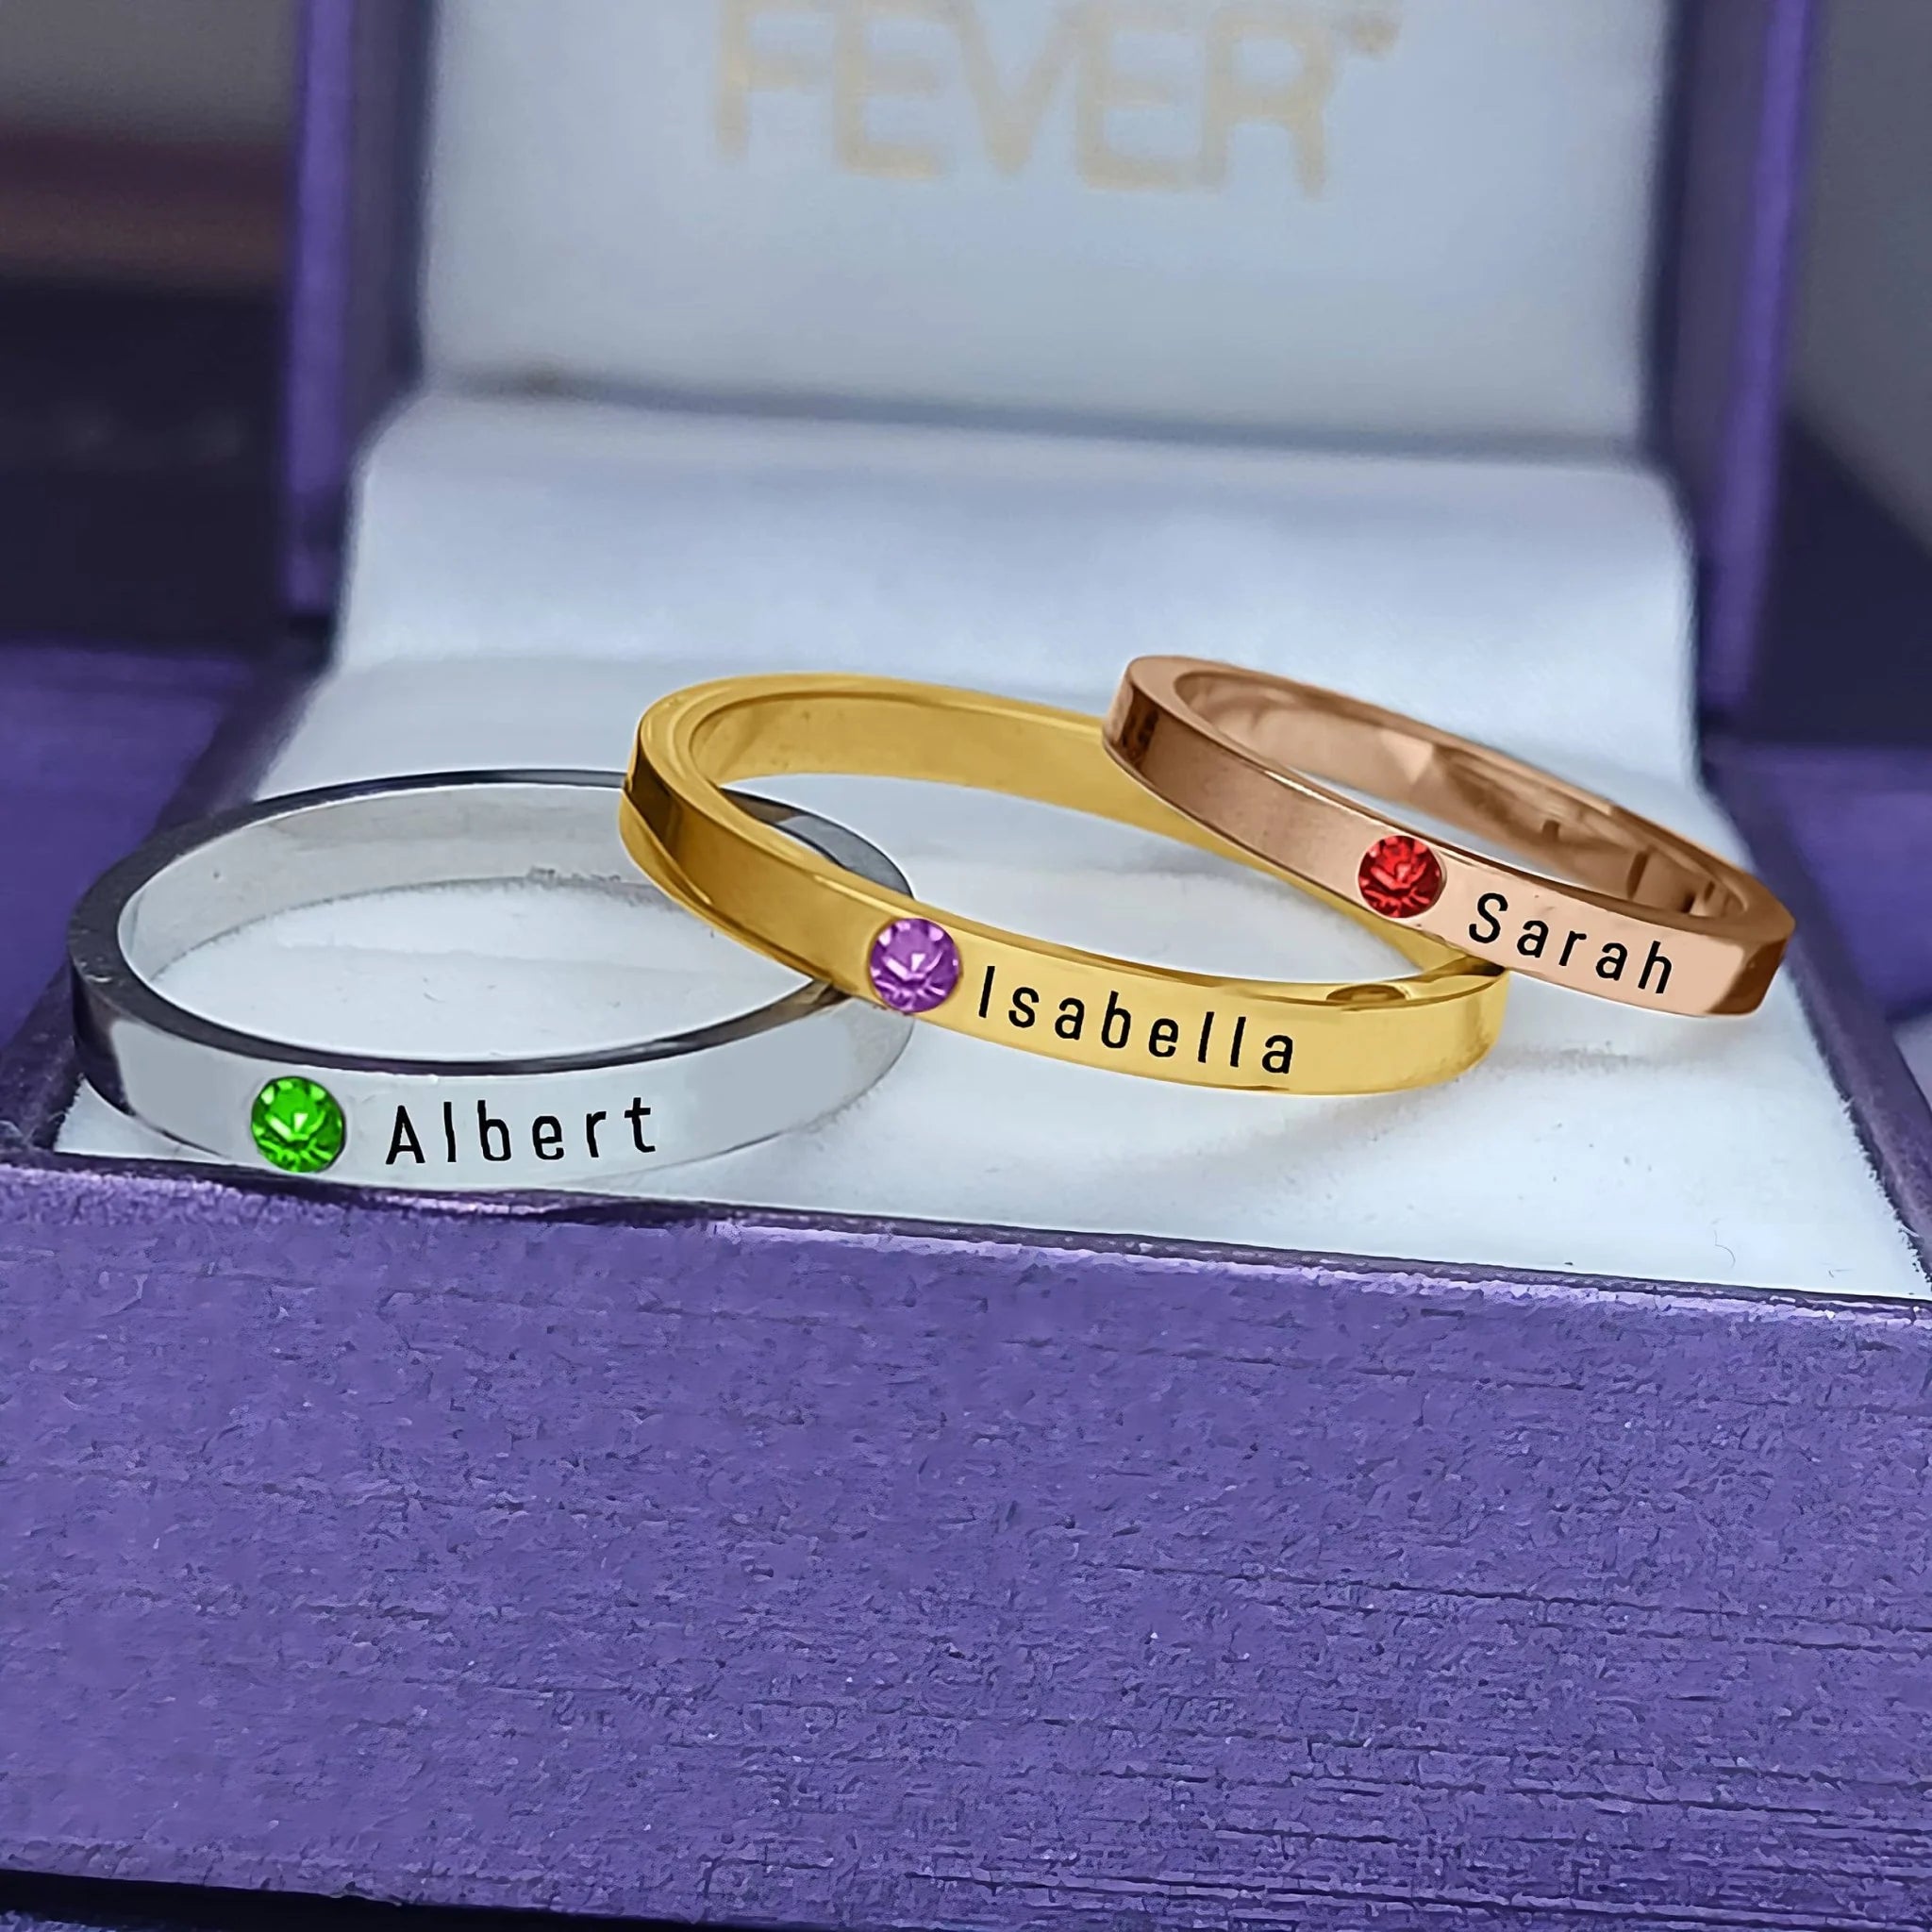 Choosing the Perfect Personalized Memorial Jewelry: A Guide for Memorial Jewellery Seekers